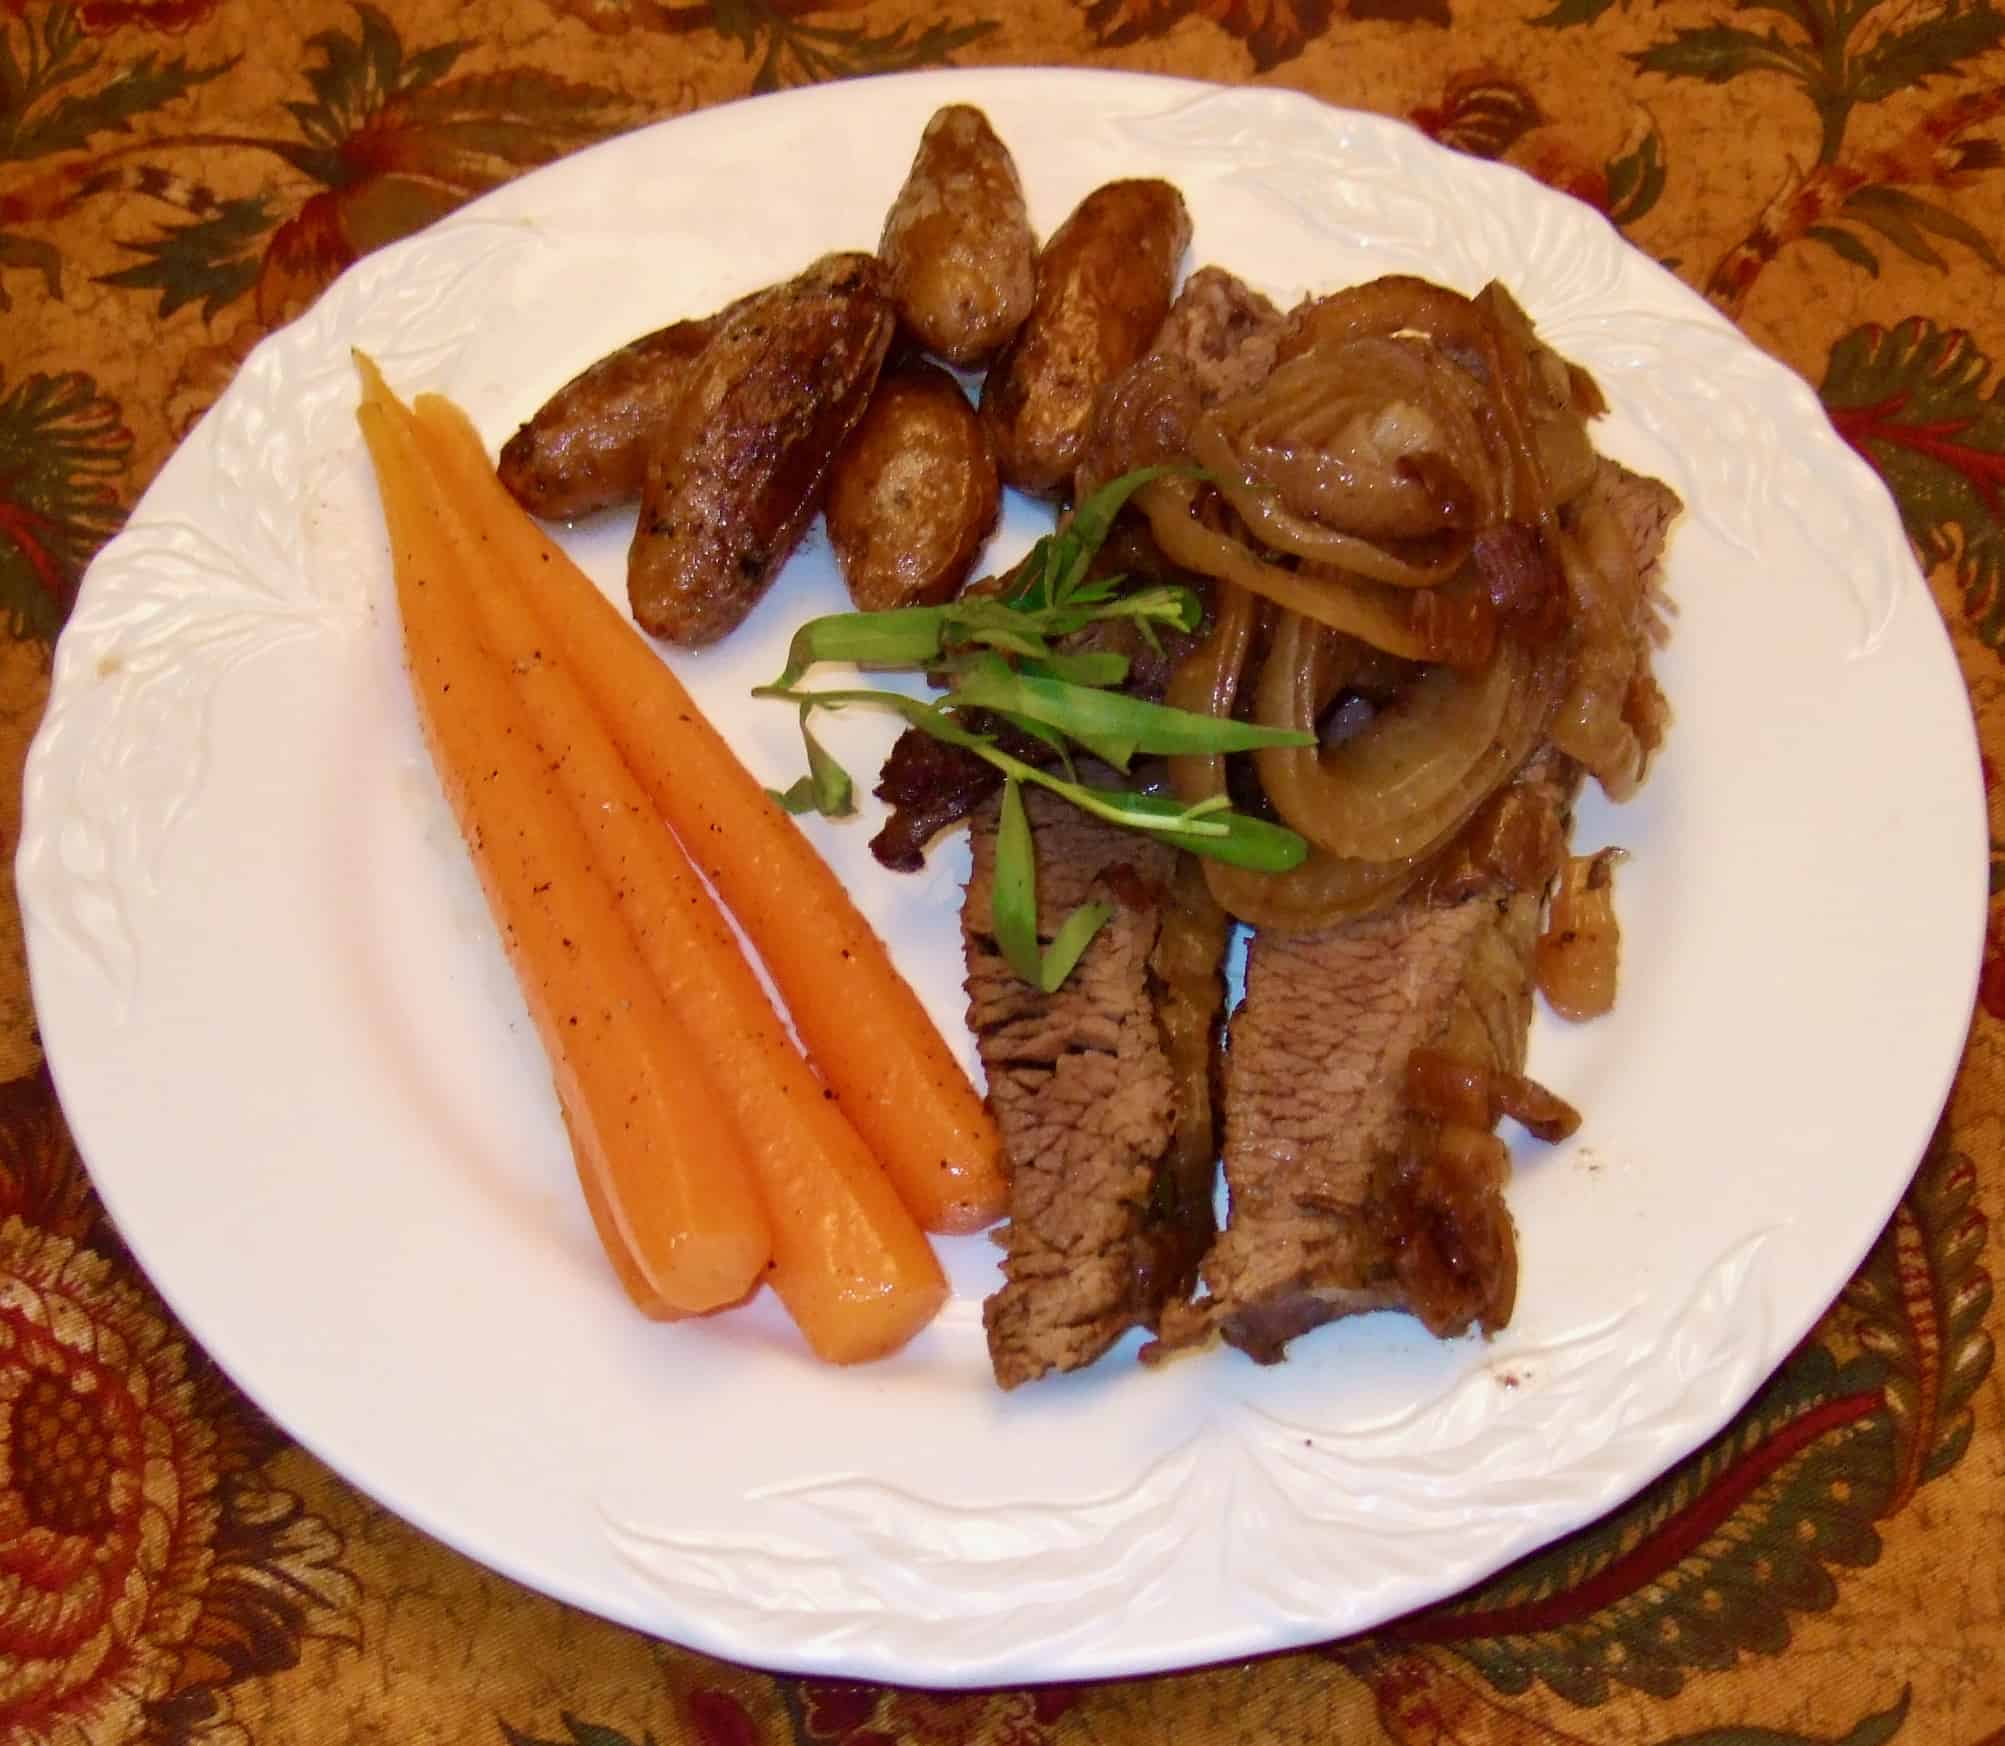 Brisket of Beef with Fingerling Potatoes and Maple-Glazed Carrots